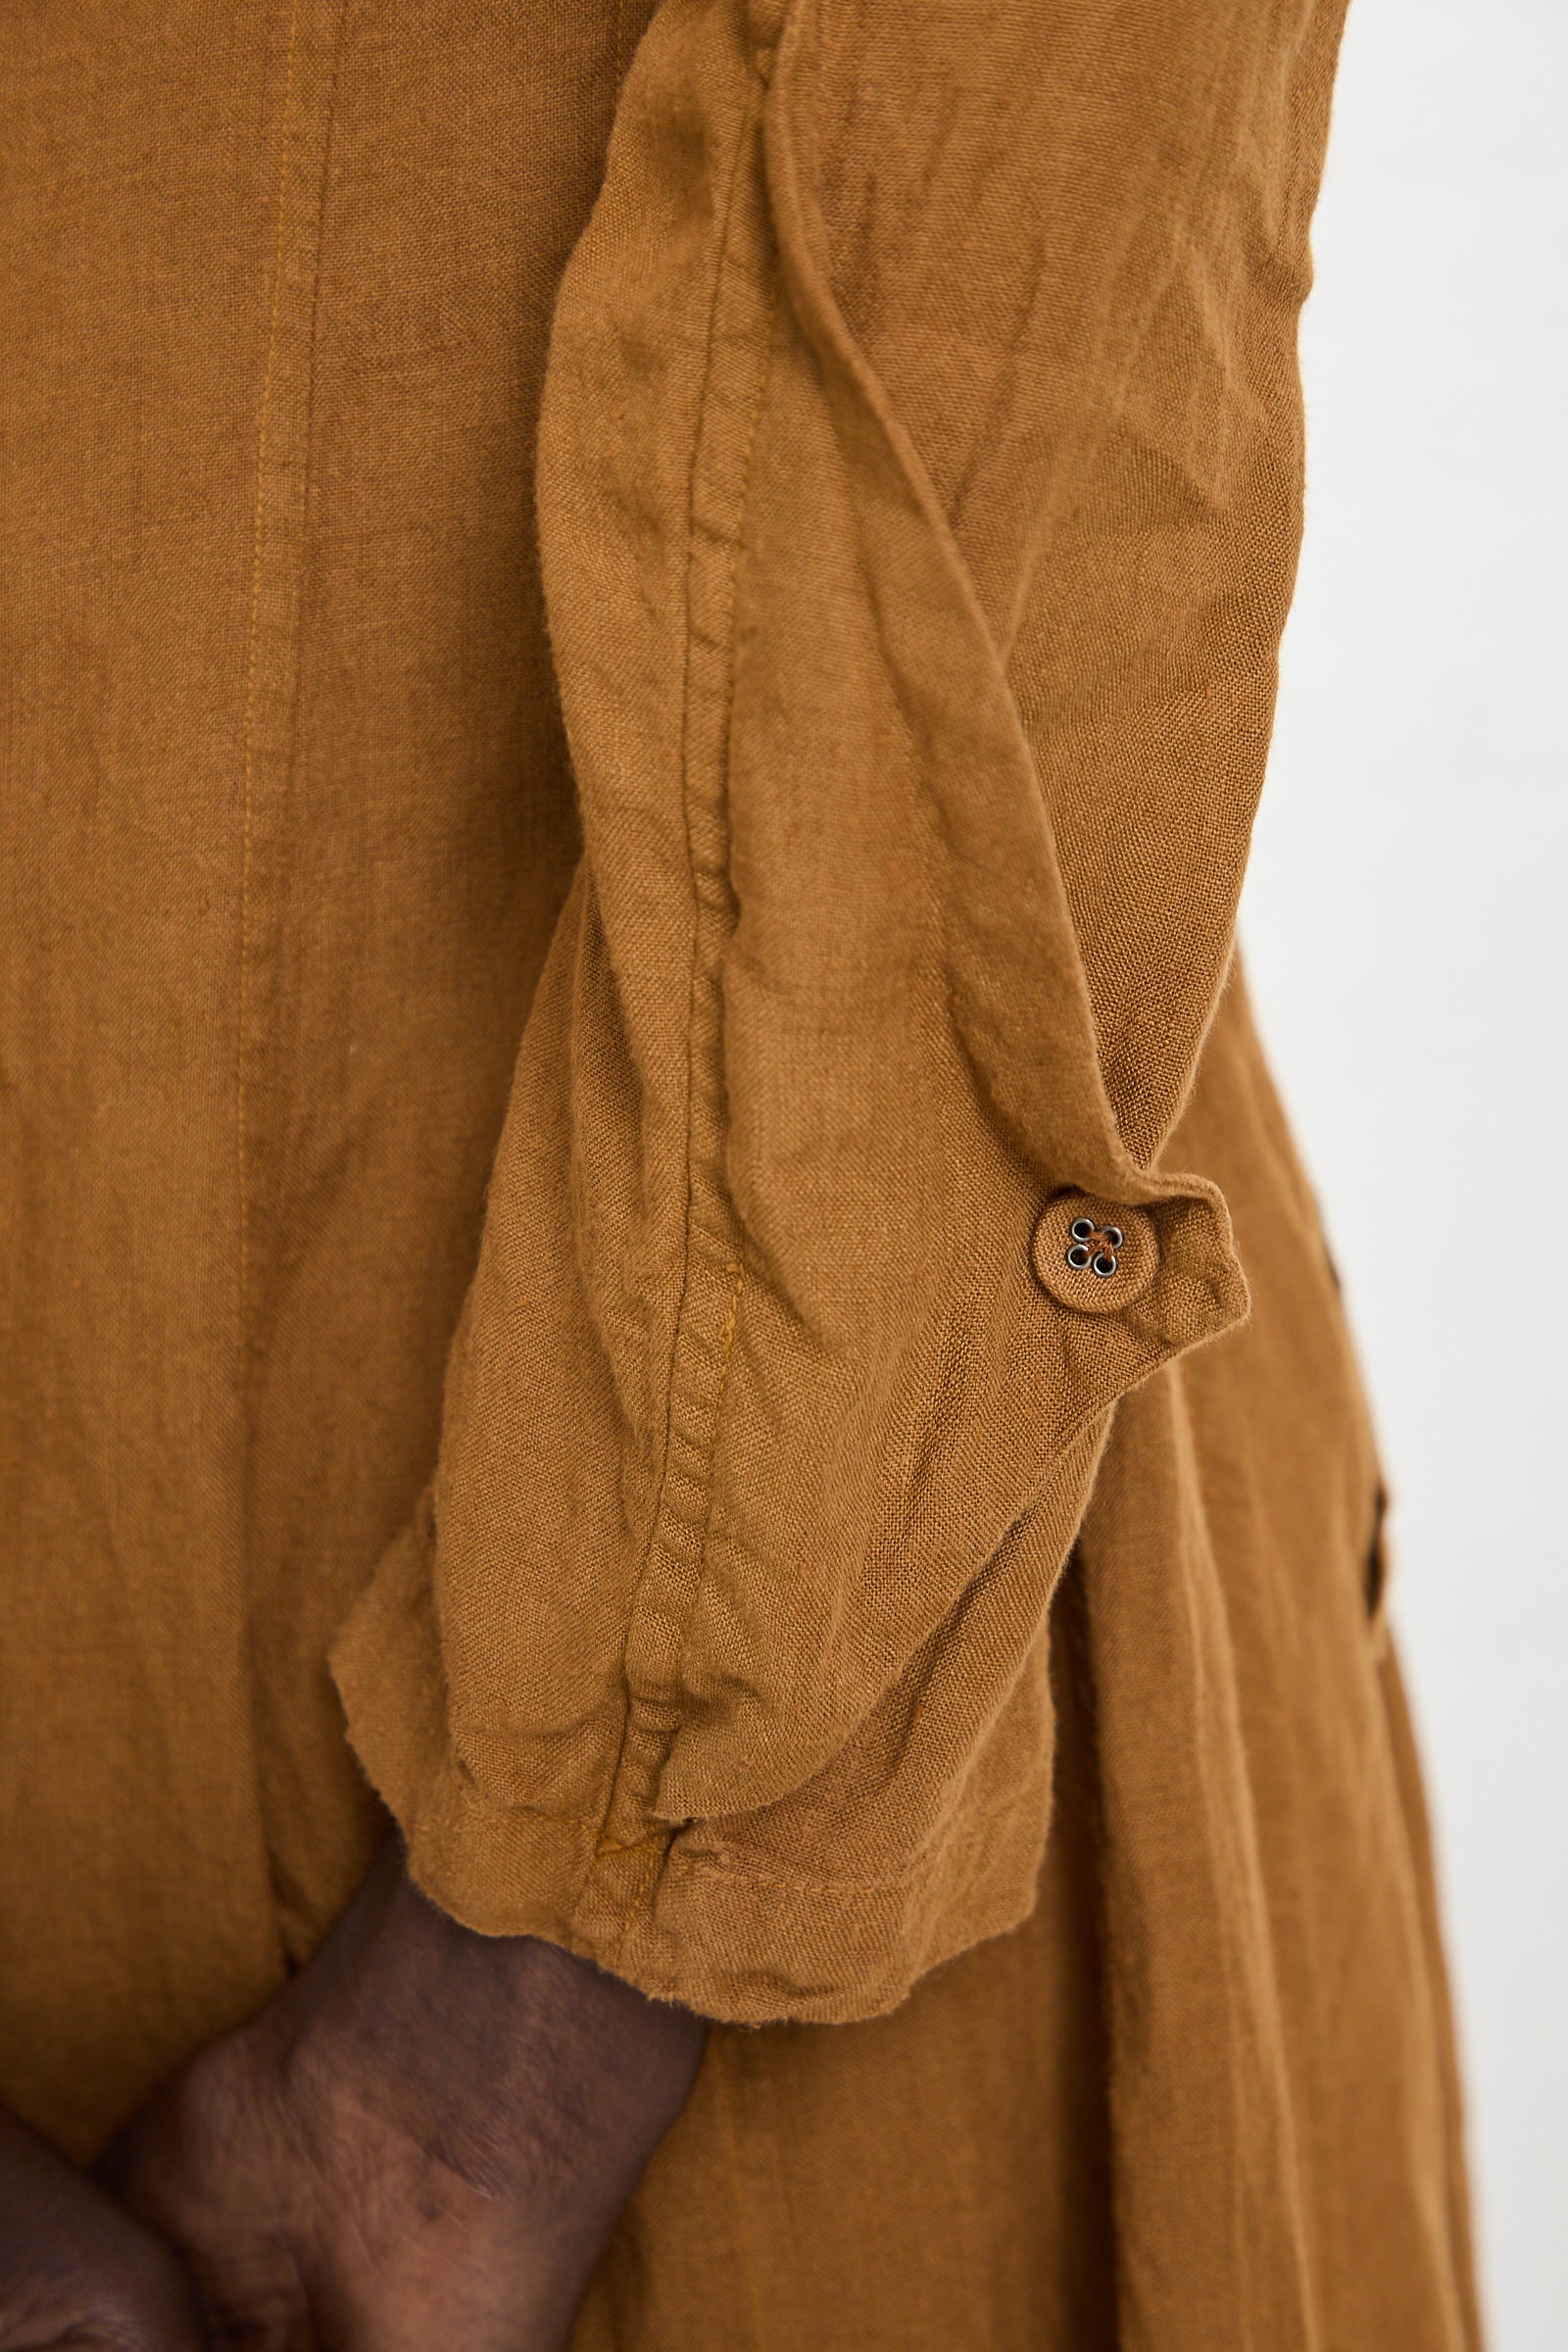 Close-up of a person wearing a long-sleeved, wrinkled, light brown Hallelujah Linen Manteau de Pompier 1800's in Coffee handmade in Kyoto. The sleeve is partially rolled up and secured with a buttoned tab. The person's hands are crossed at the waist.